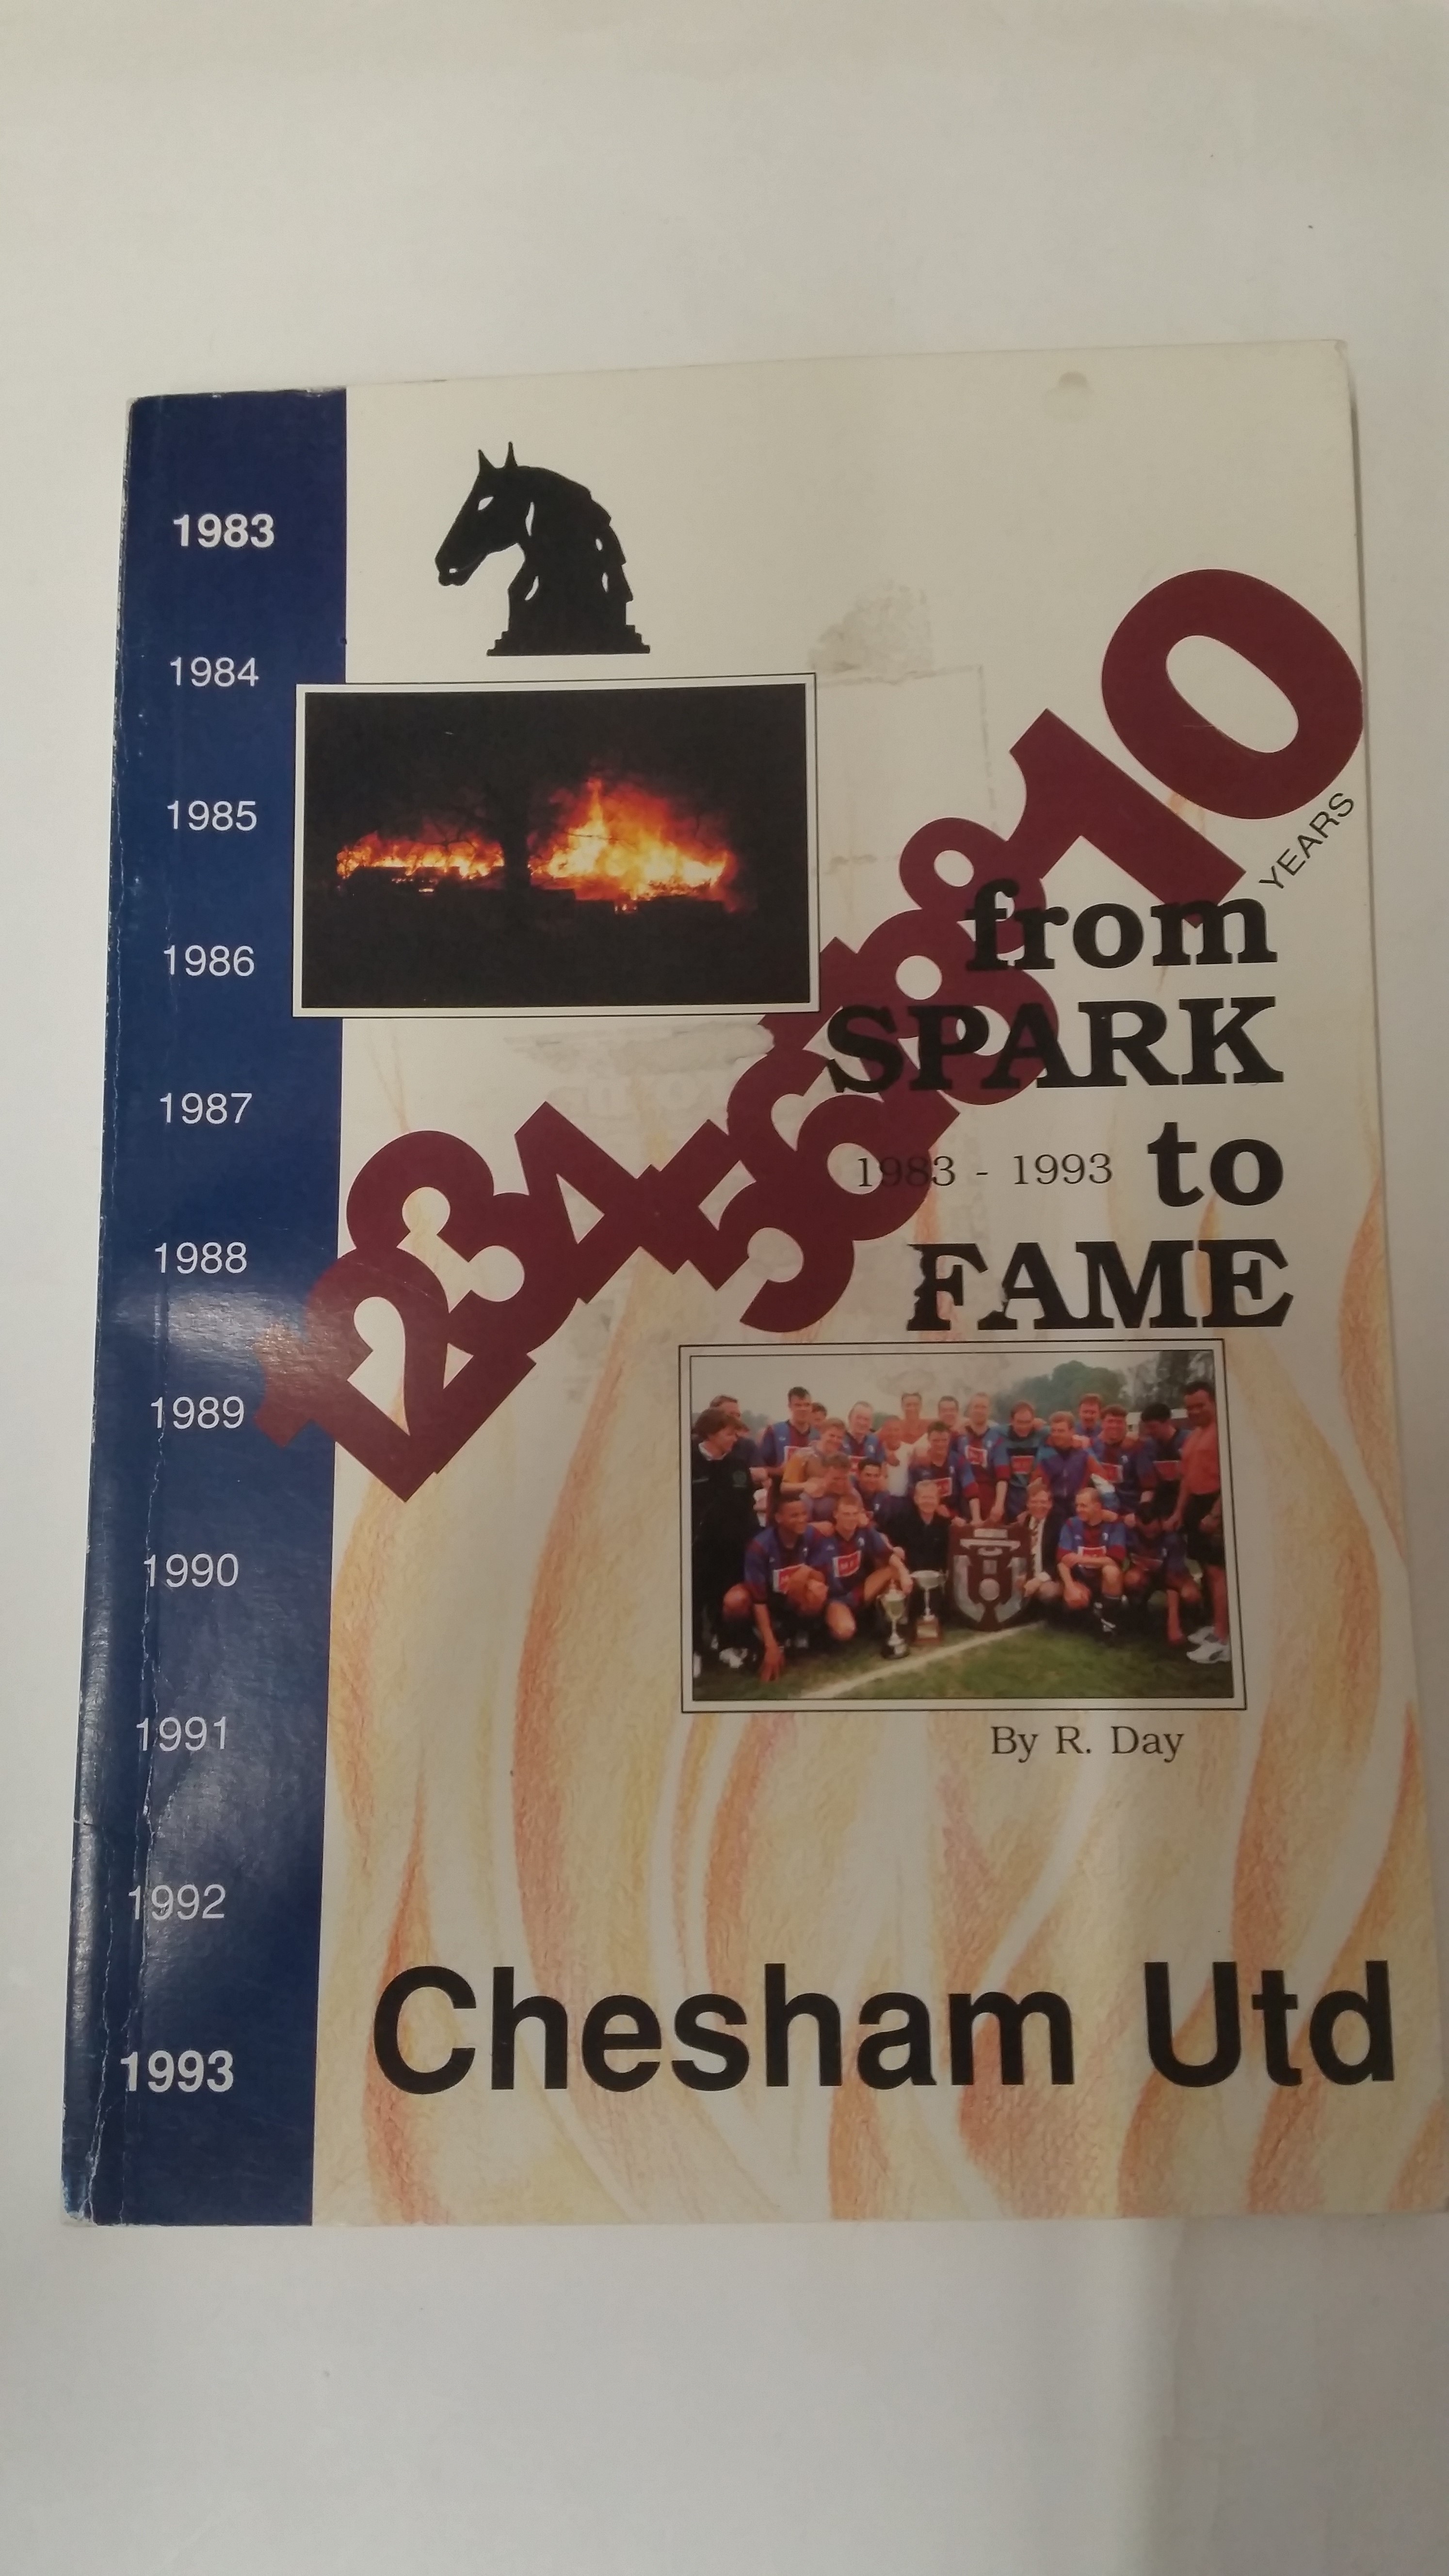 FOOTBALL, softback edition of Chesham United - From Spark to Fame 1983-1993 by Day, VG